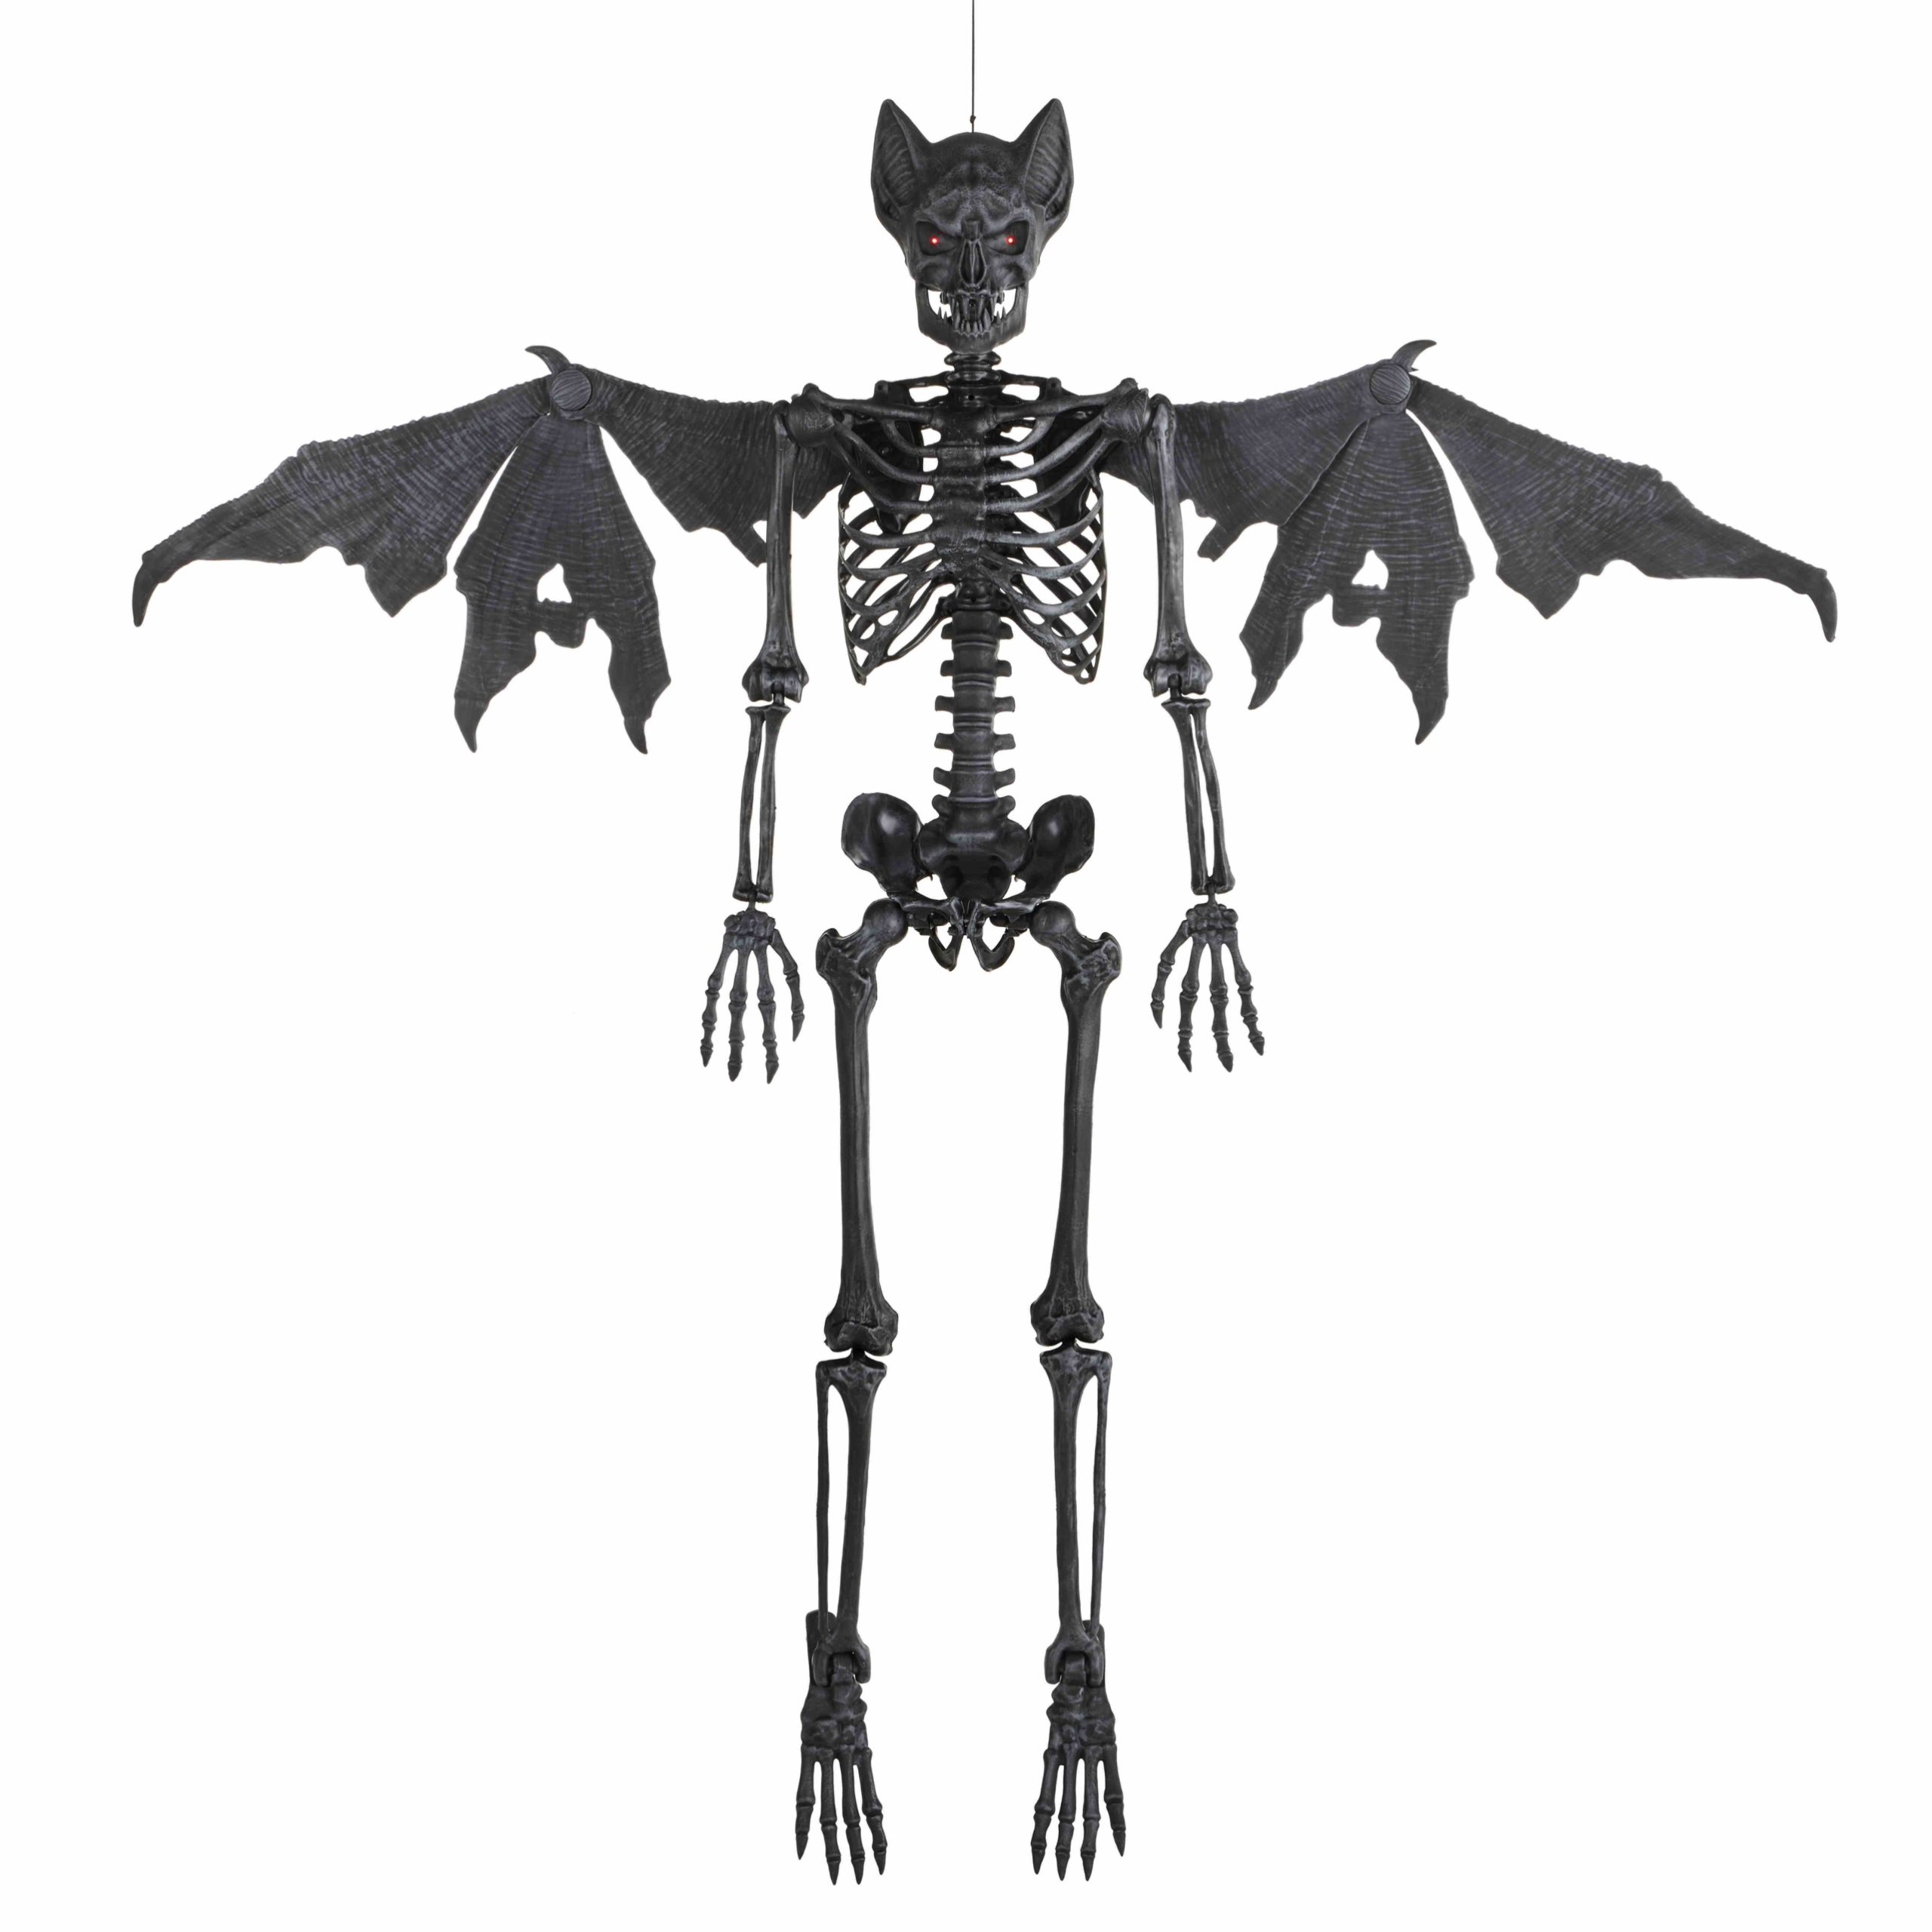 BAT SKELETON Is One Of The Best And The Most Popular Halloween Party Decorations To Buy This Year